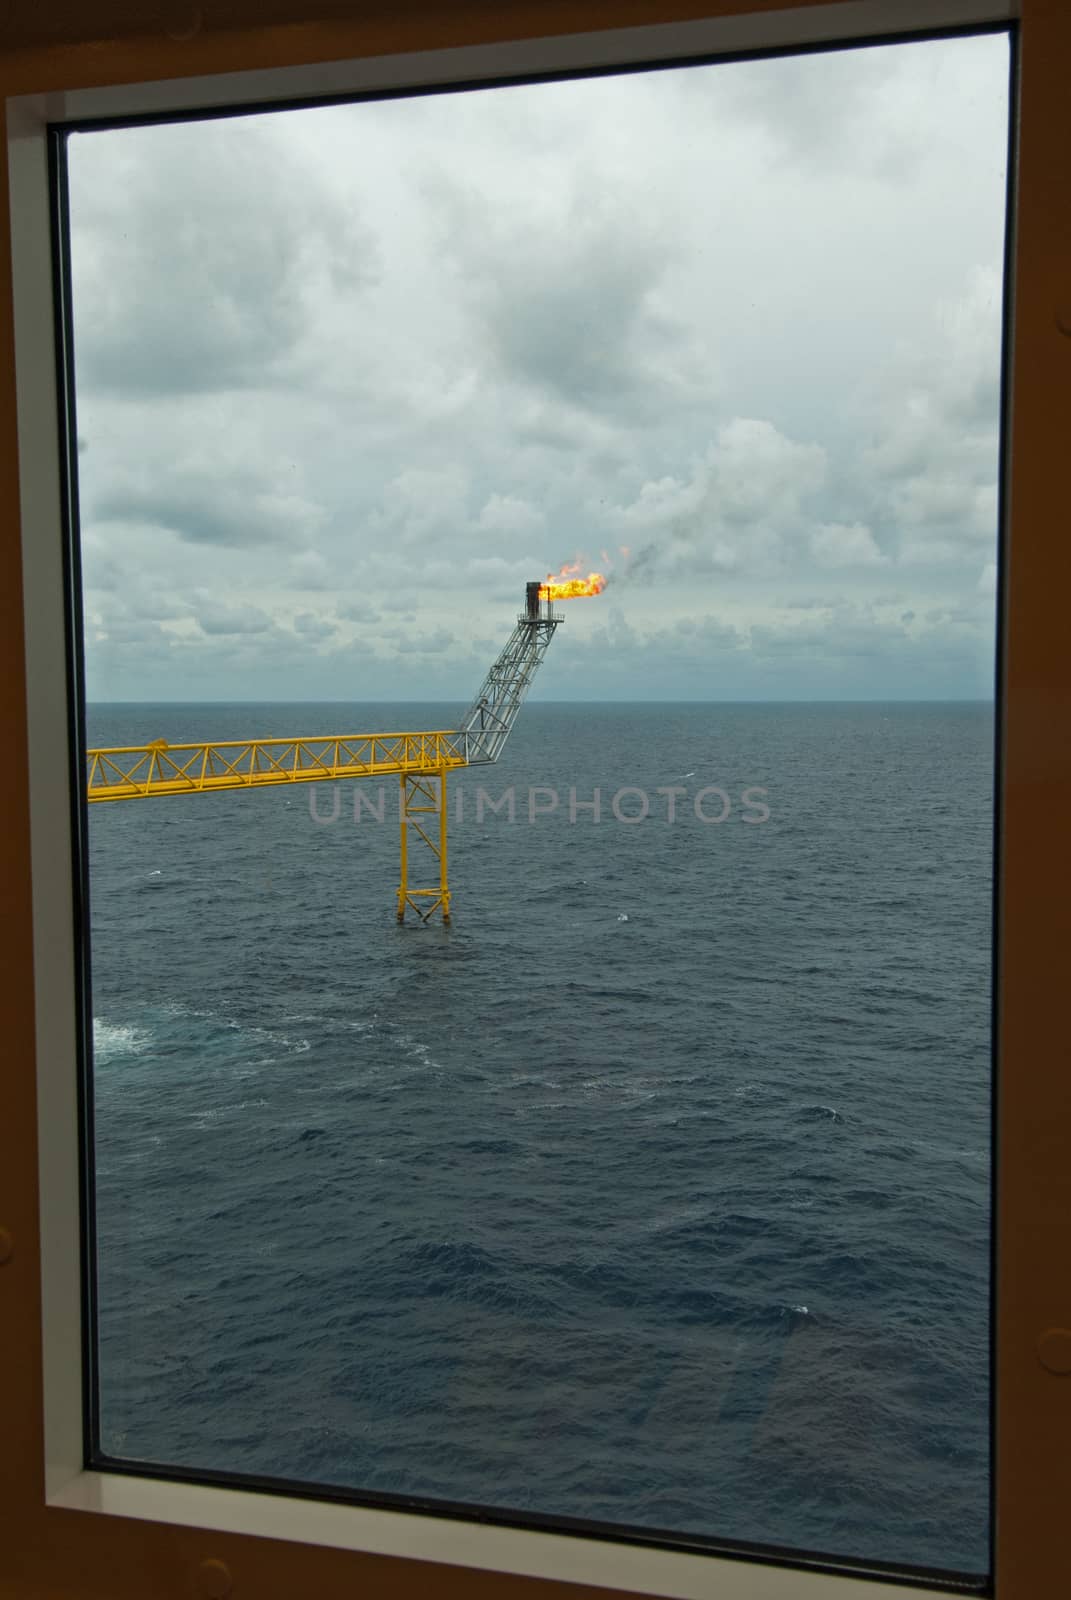 Oil and gas rig platforms through he window frame